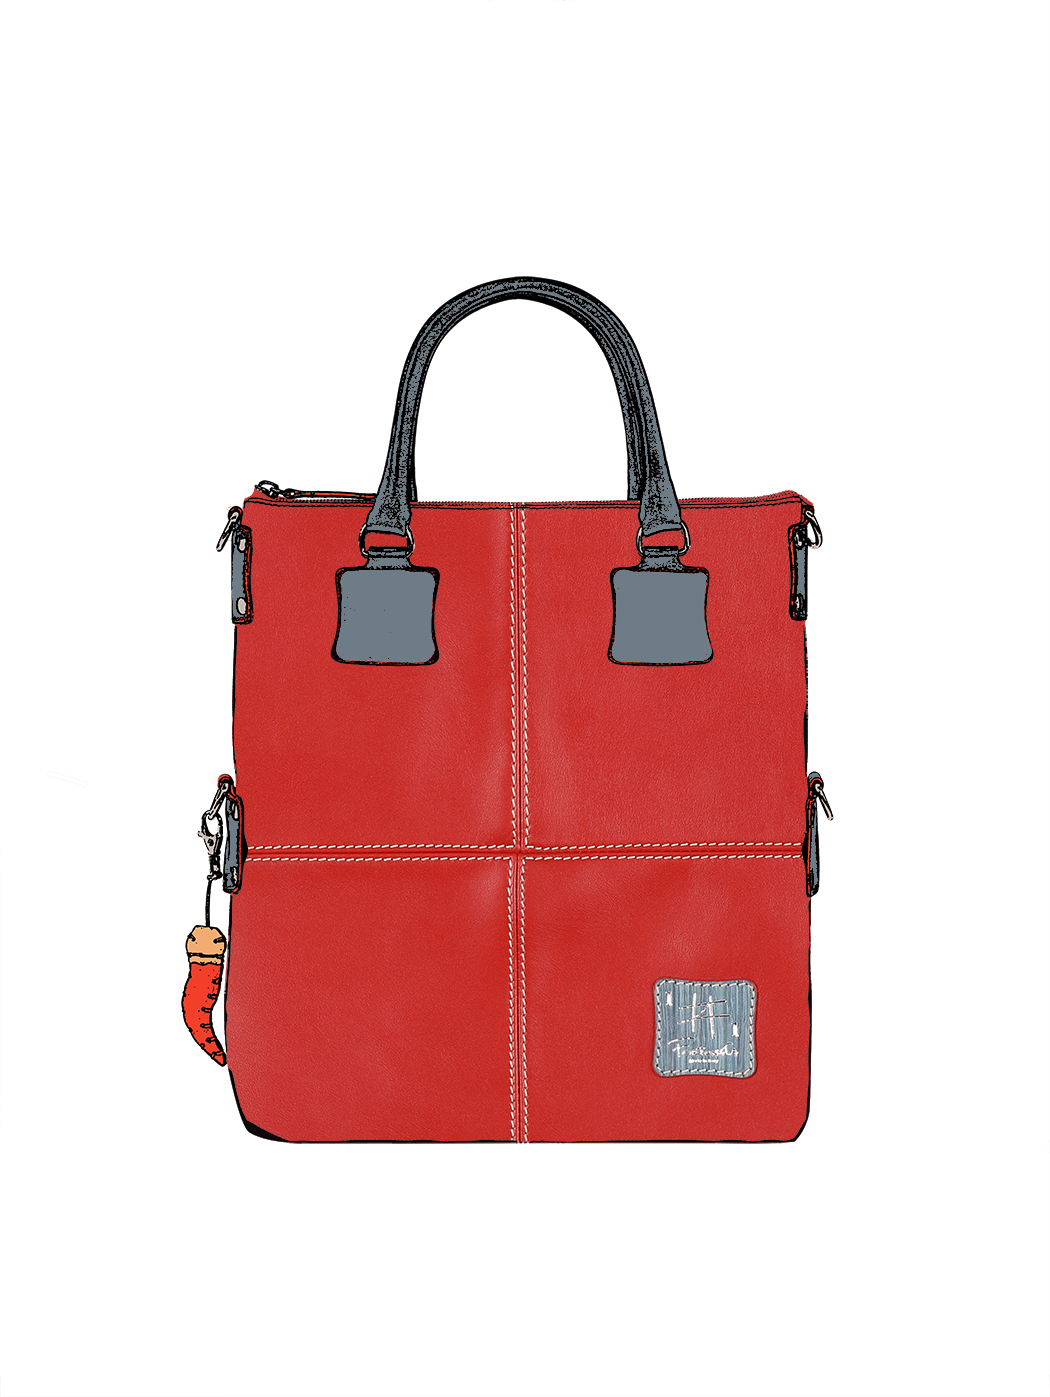 Large Tote Bag in Leather Red - Handmade in Italy